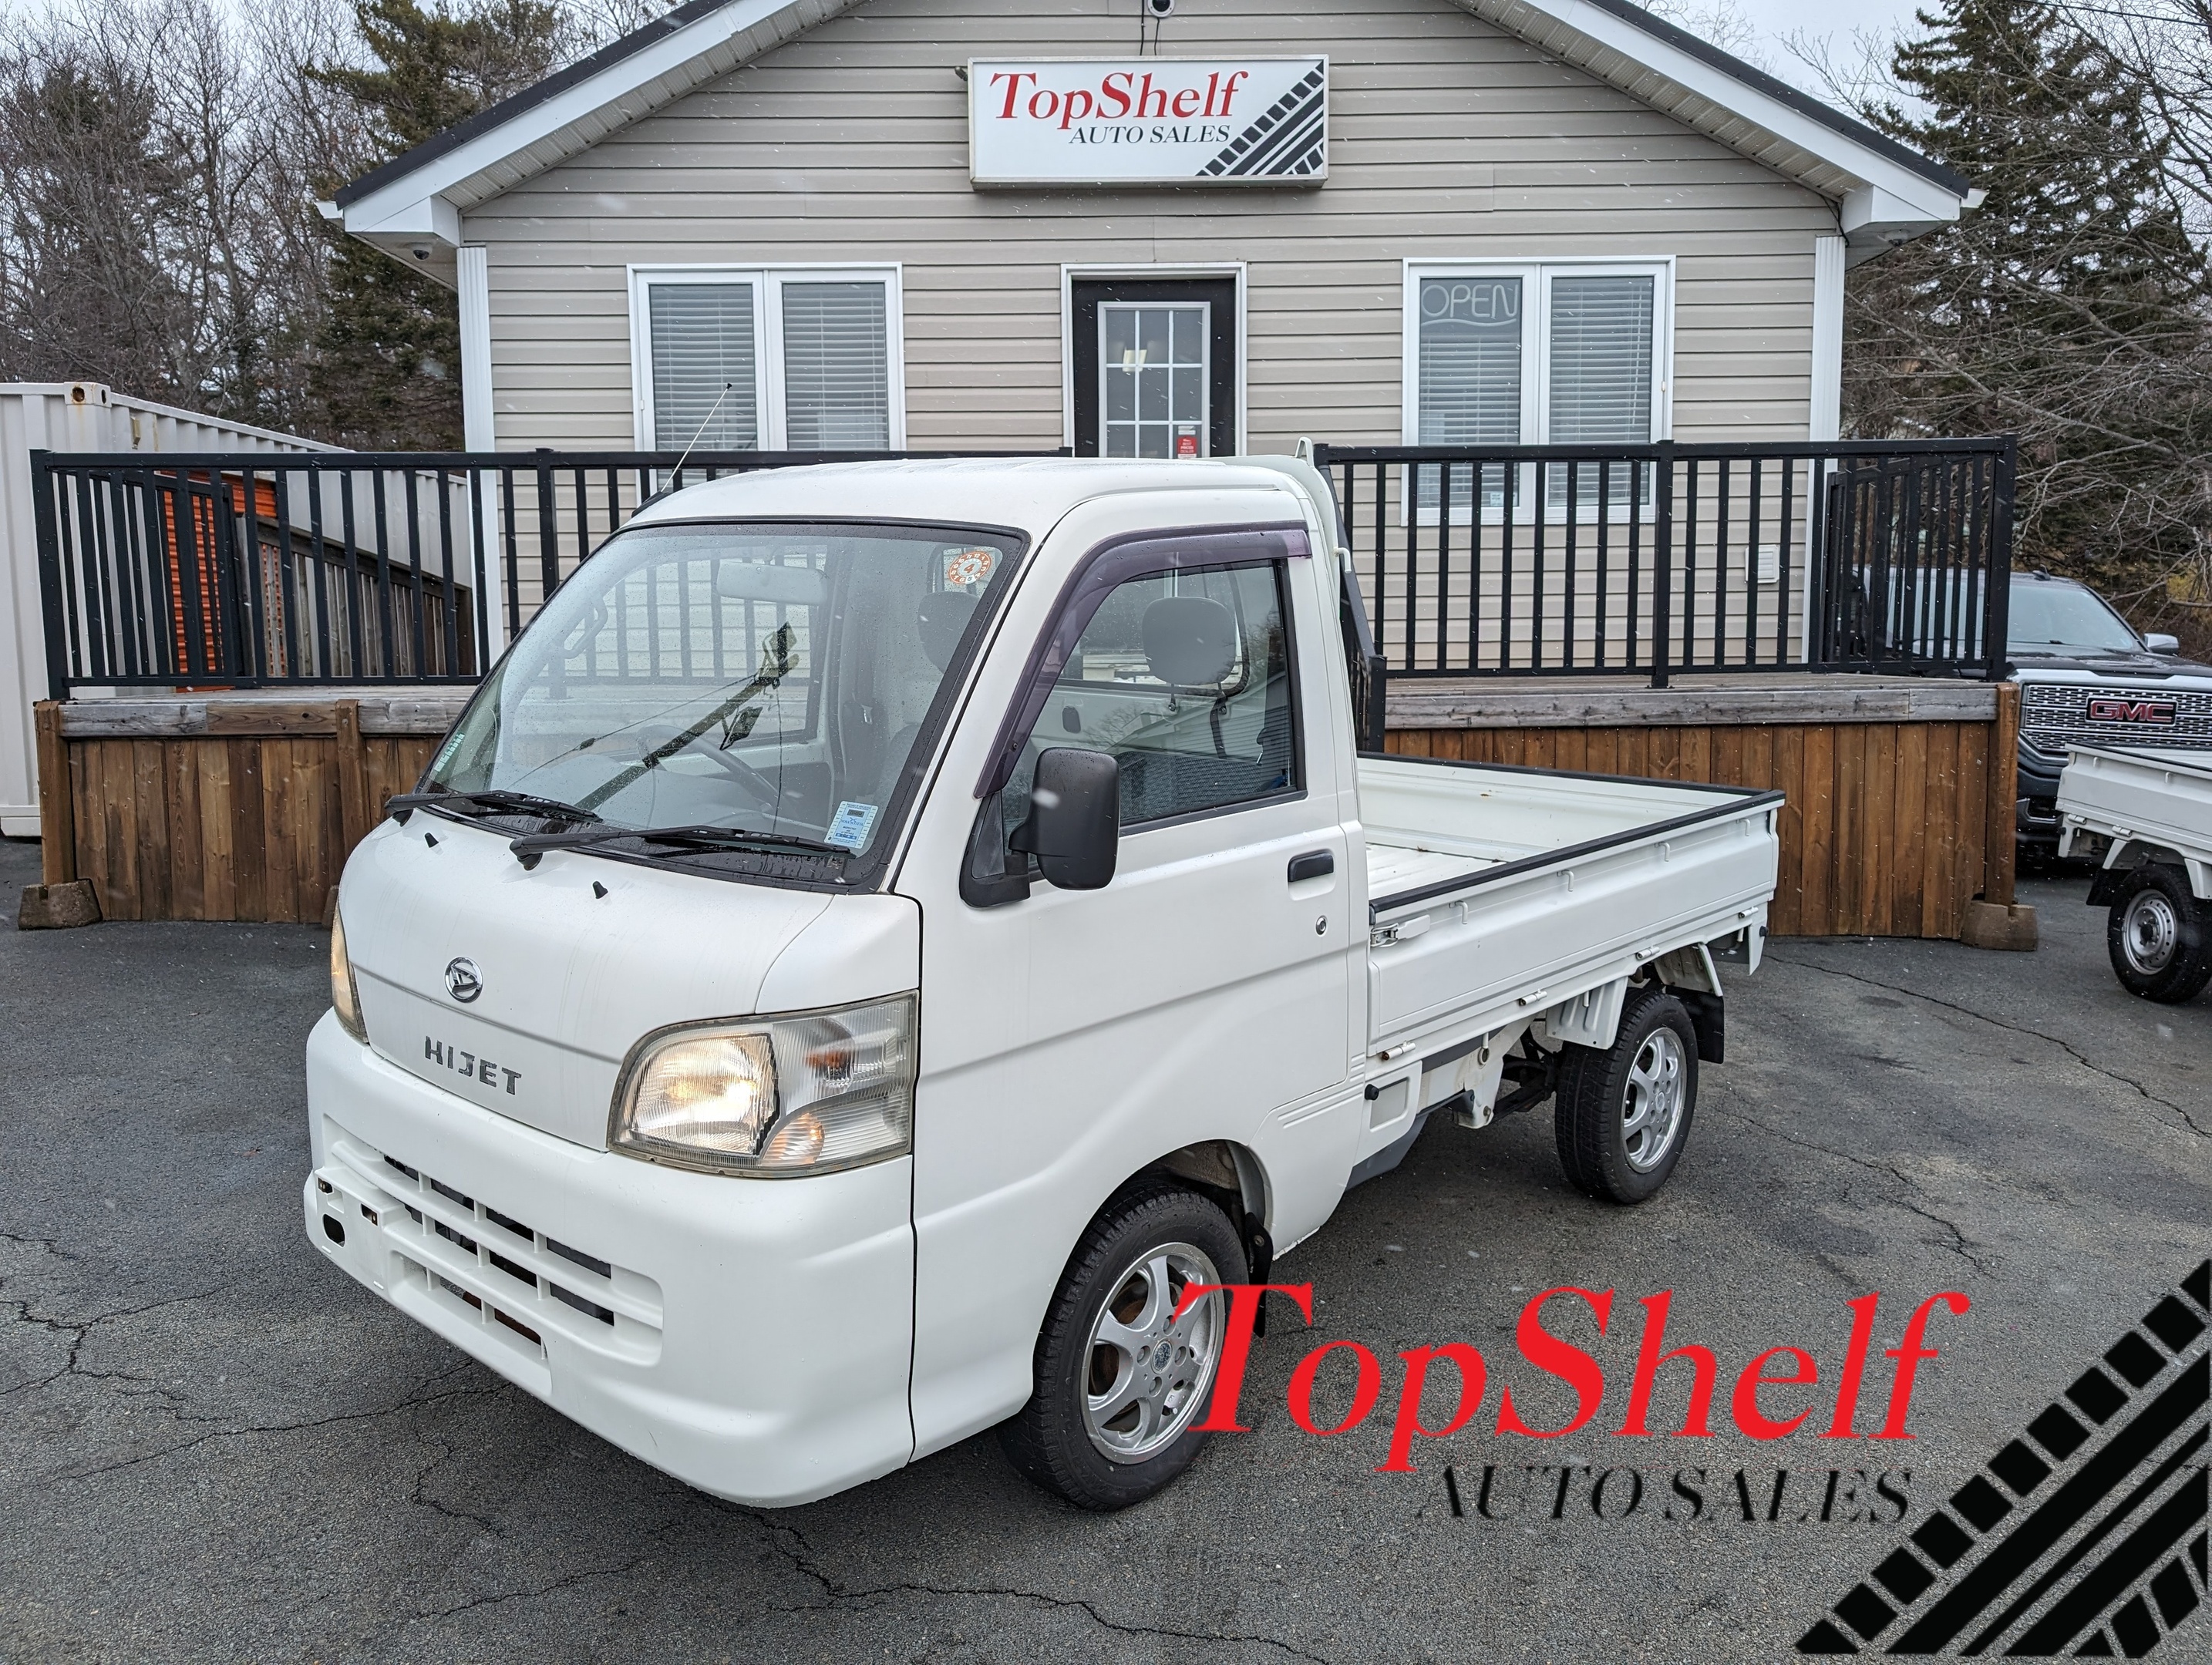 2007 Daihatsu Hijet Truck 4WD | 5sp Manual | Air Conditioning | Only 61k km!